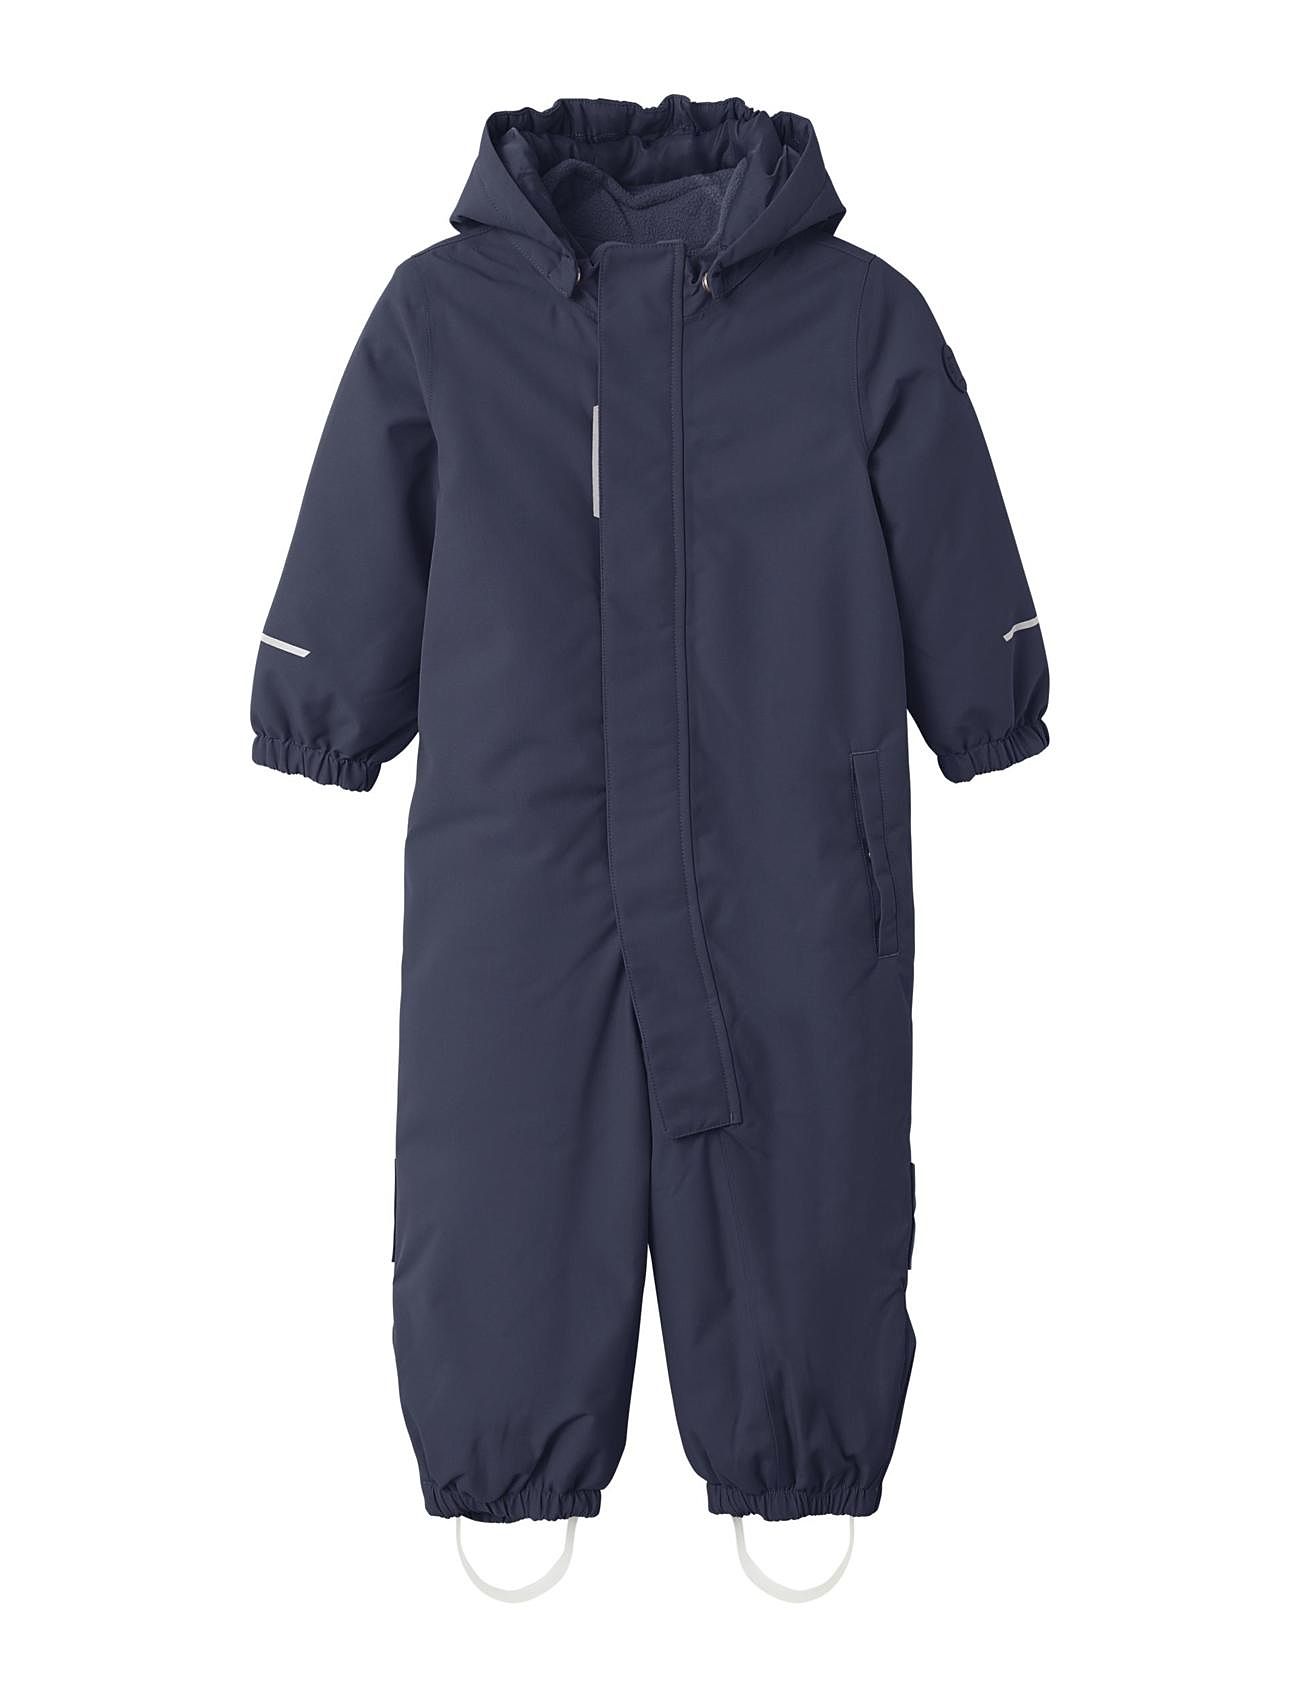 Buy Nmnsnow10 Coveralls returns it easy 50.00 from at and name Suit Boozt.com. 1fo €. delivery Fast it - online name Solid Noos